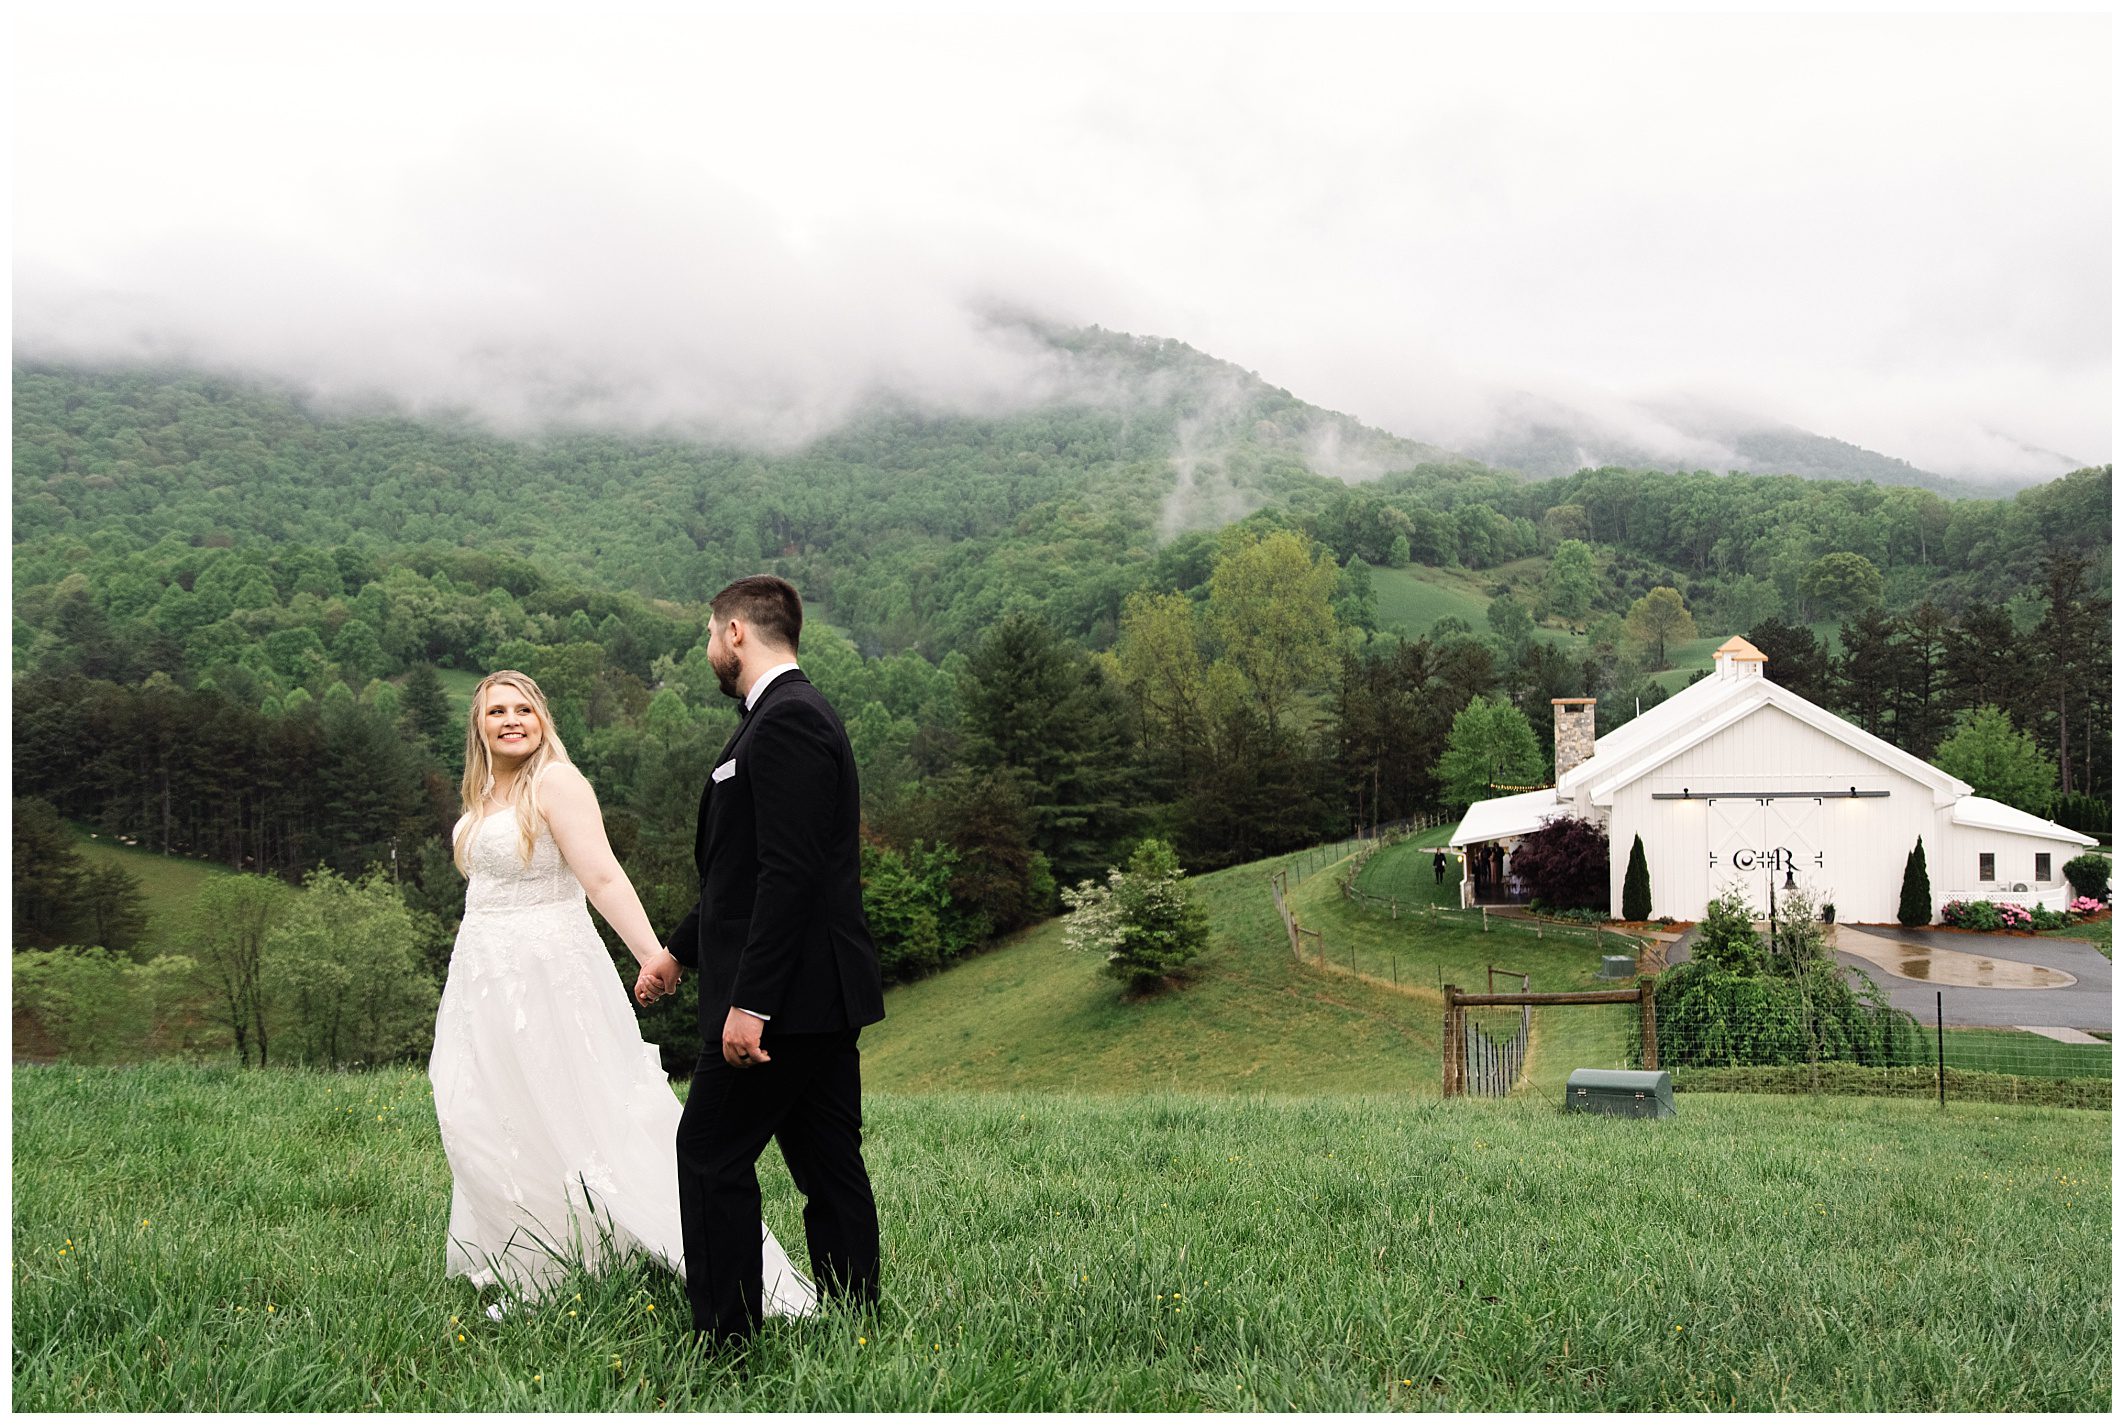 A bride in a white dress and a groom in a black suit holding hands and smiling at each other on a green hill with foggy mountains and rain at Chestnut Ridge in the background.